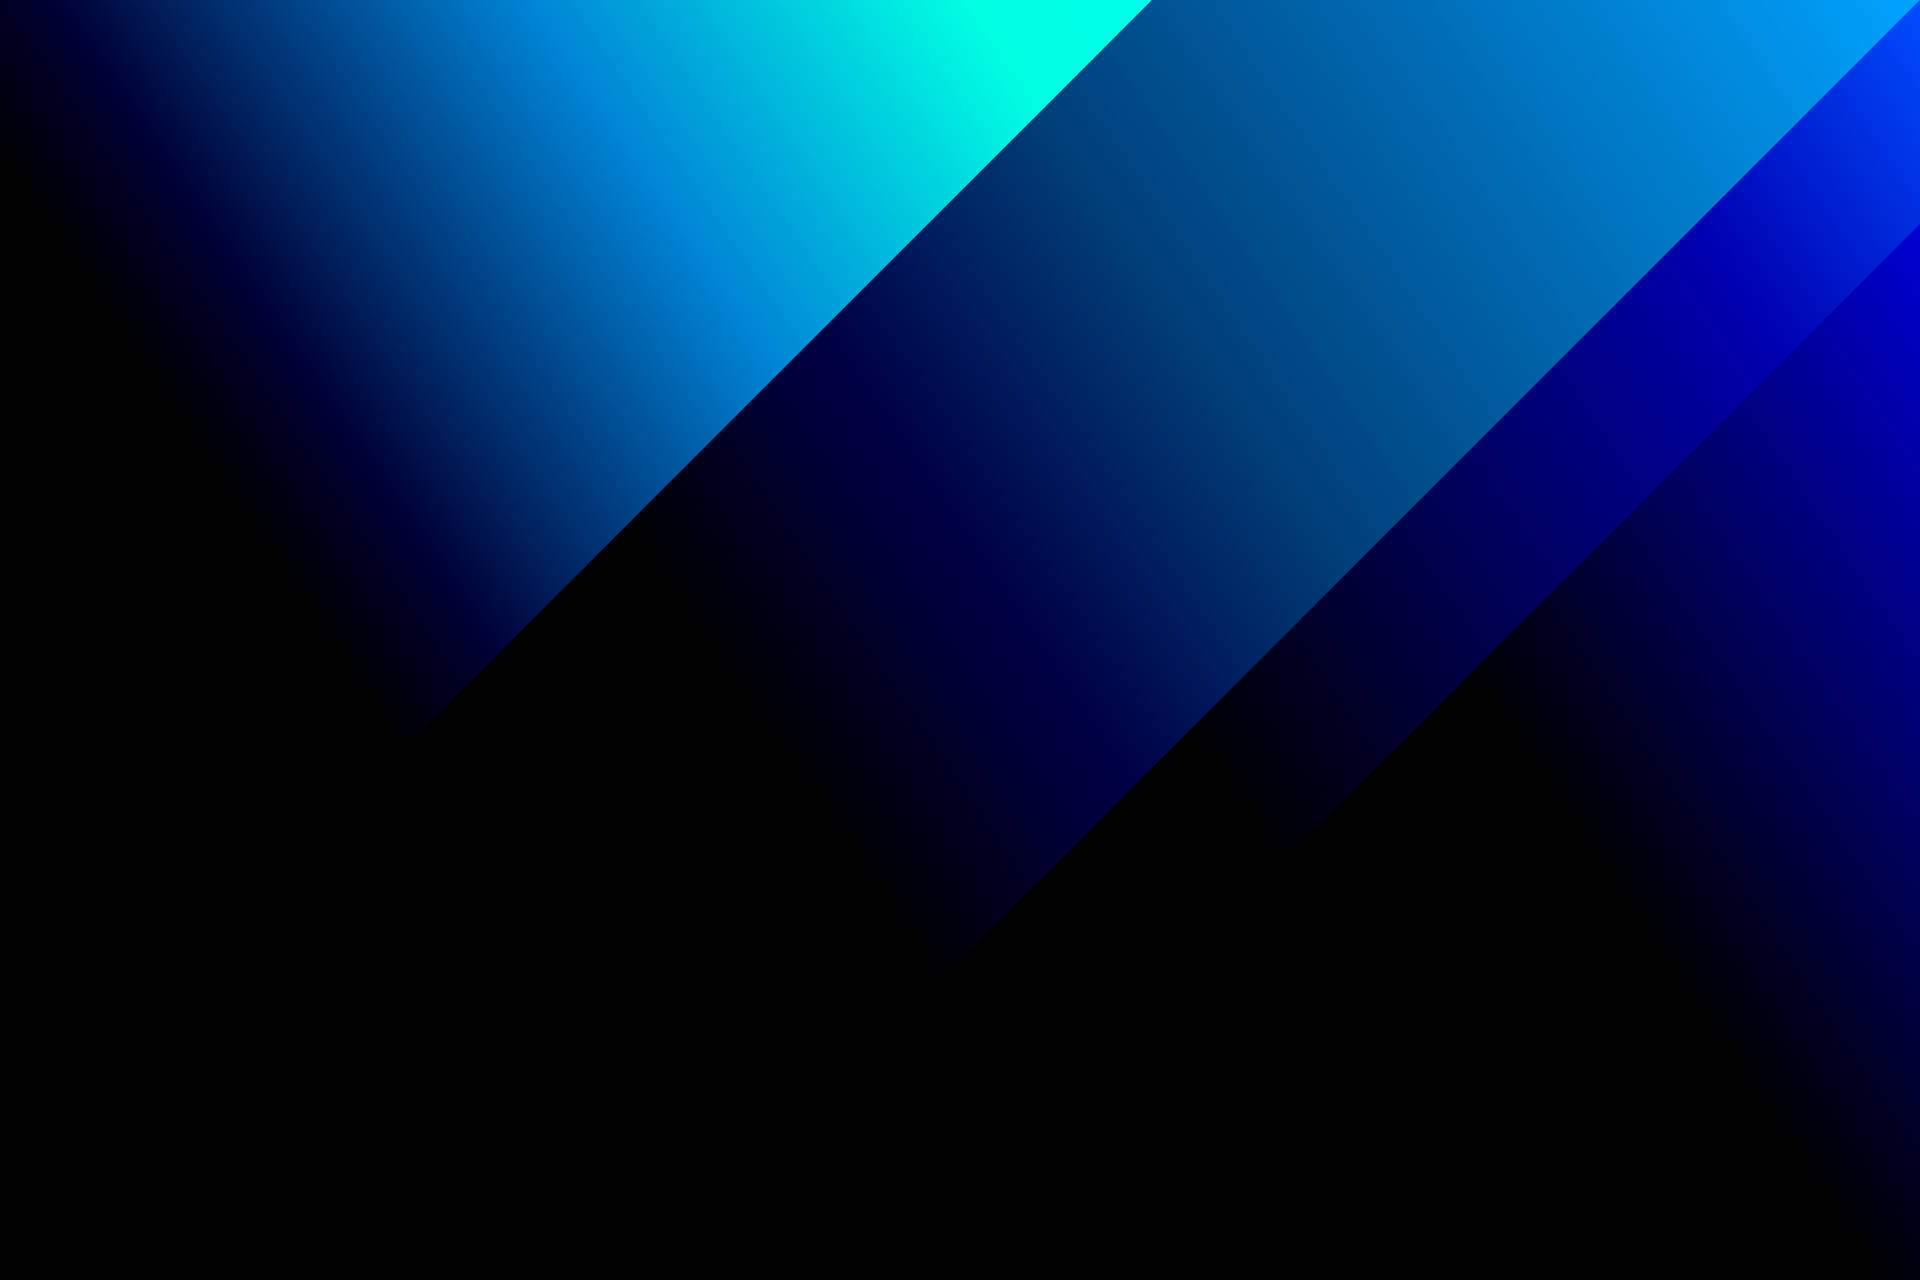 Solid Dark Blue And Black Vector Picture